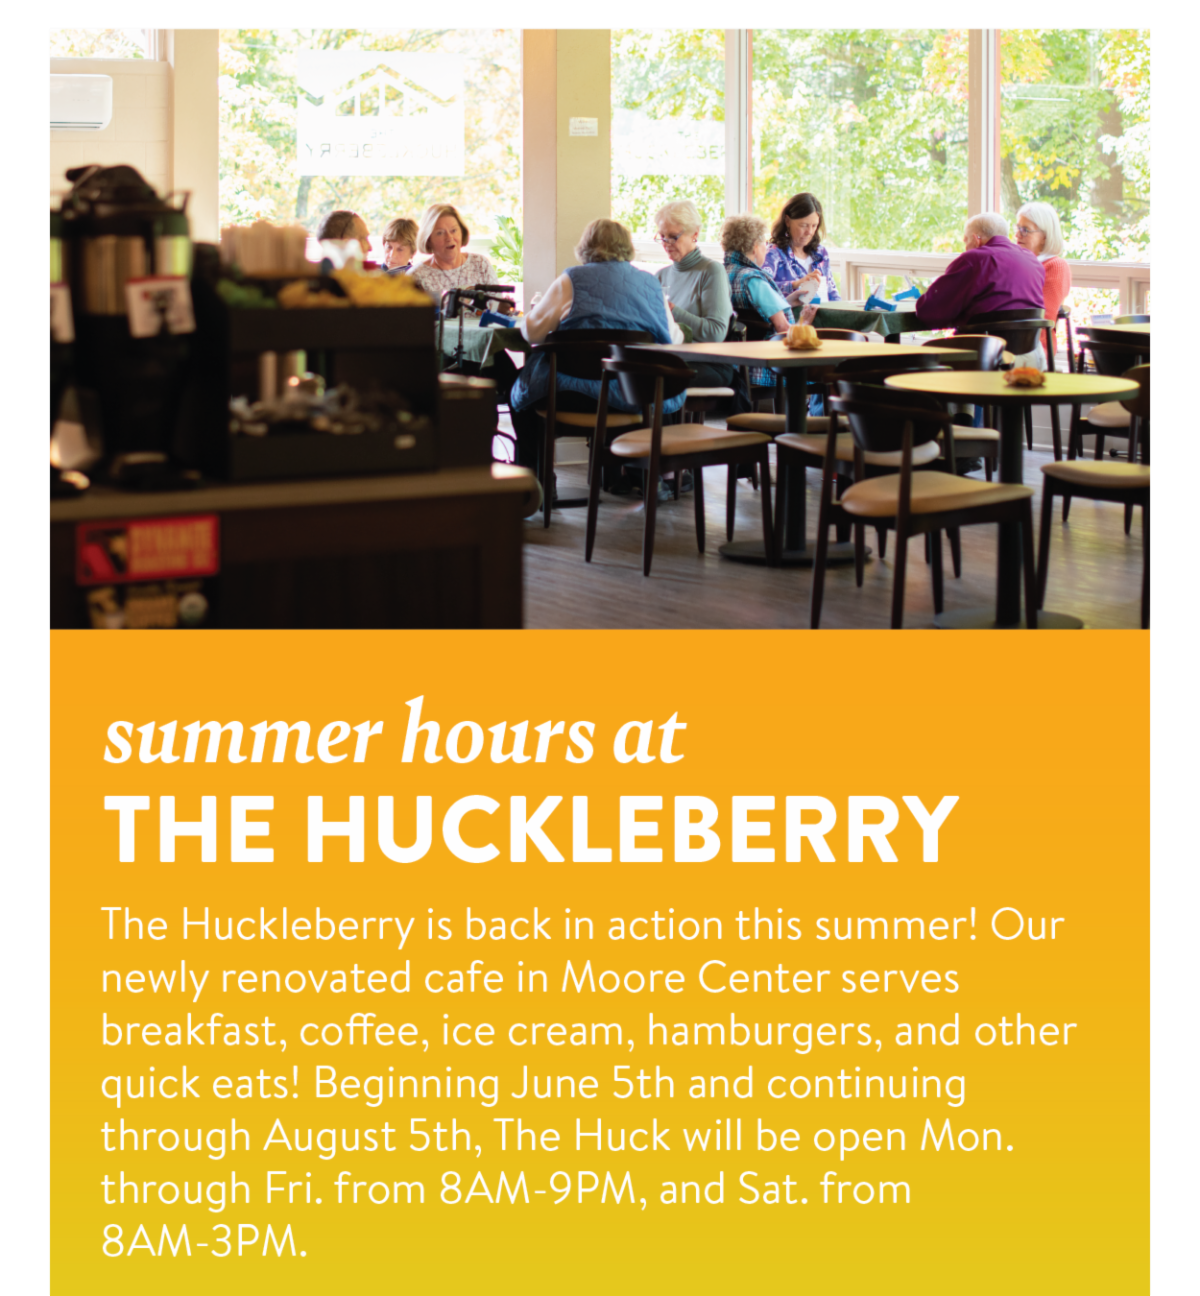 Summer hours at The Huckleberry - The Huckleberry is back in action this summer! Our newly renovated cafe in Moore Center serves breakfast, coffee, ice cream, hamburgers, and other quick eats! Beginning June 5th and continuing through August 5th, The Huck will be open Mon. through Fri. from 8AM-9PM, and Sat. from 8AM-3PM.